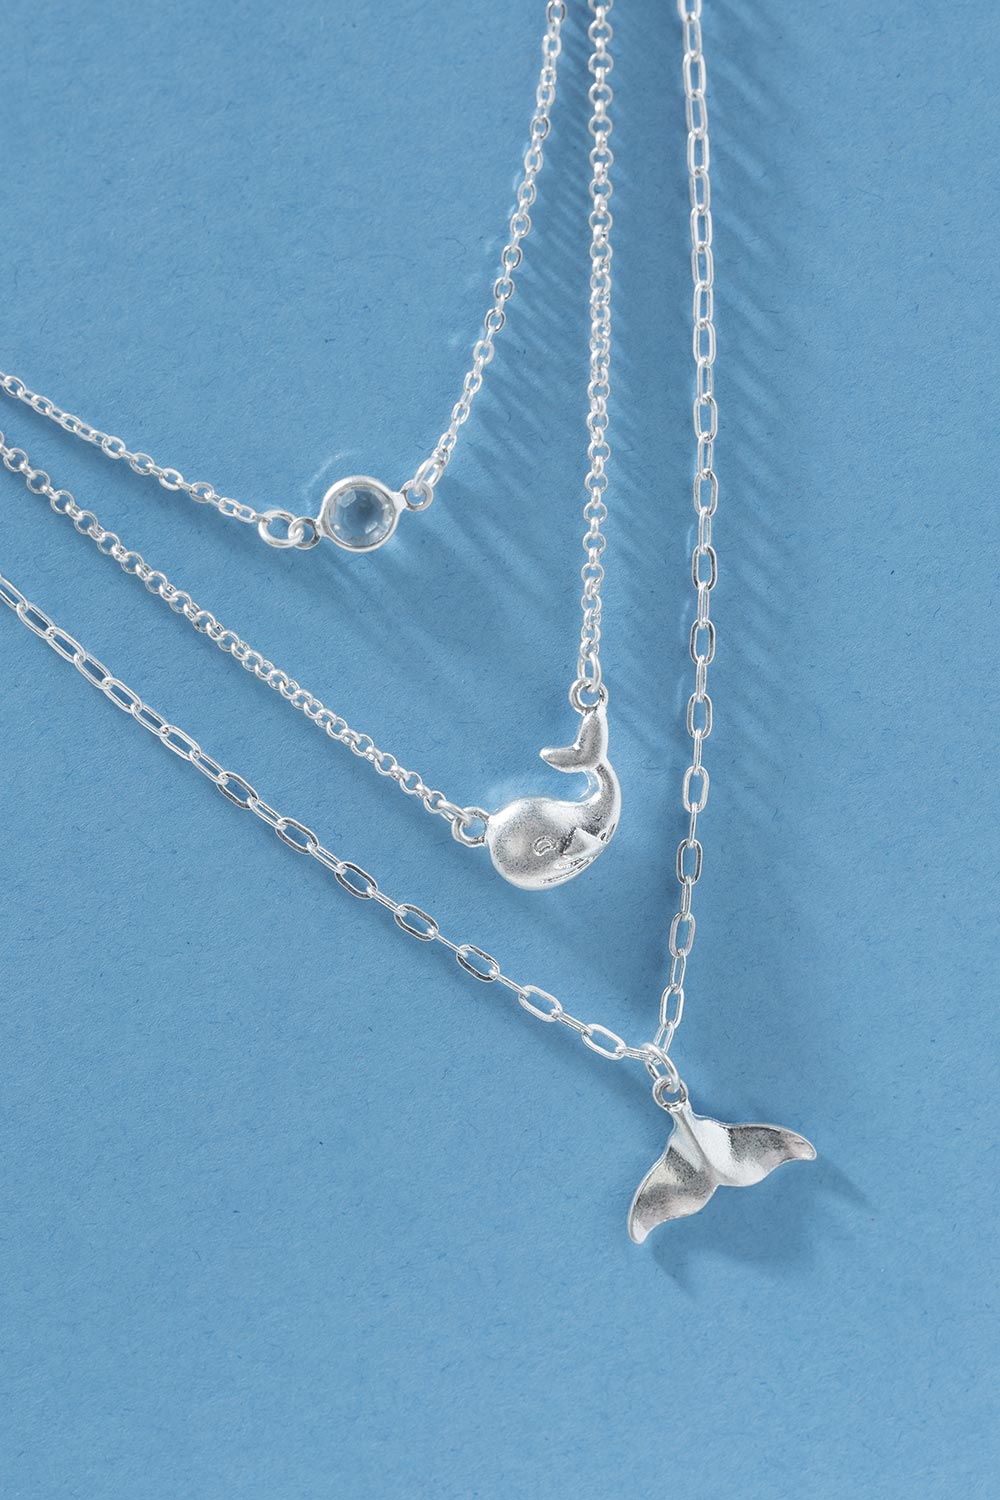 Type 2 Take to the Sea Necklace Set